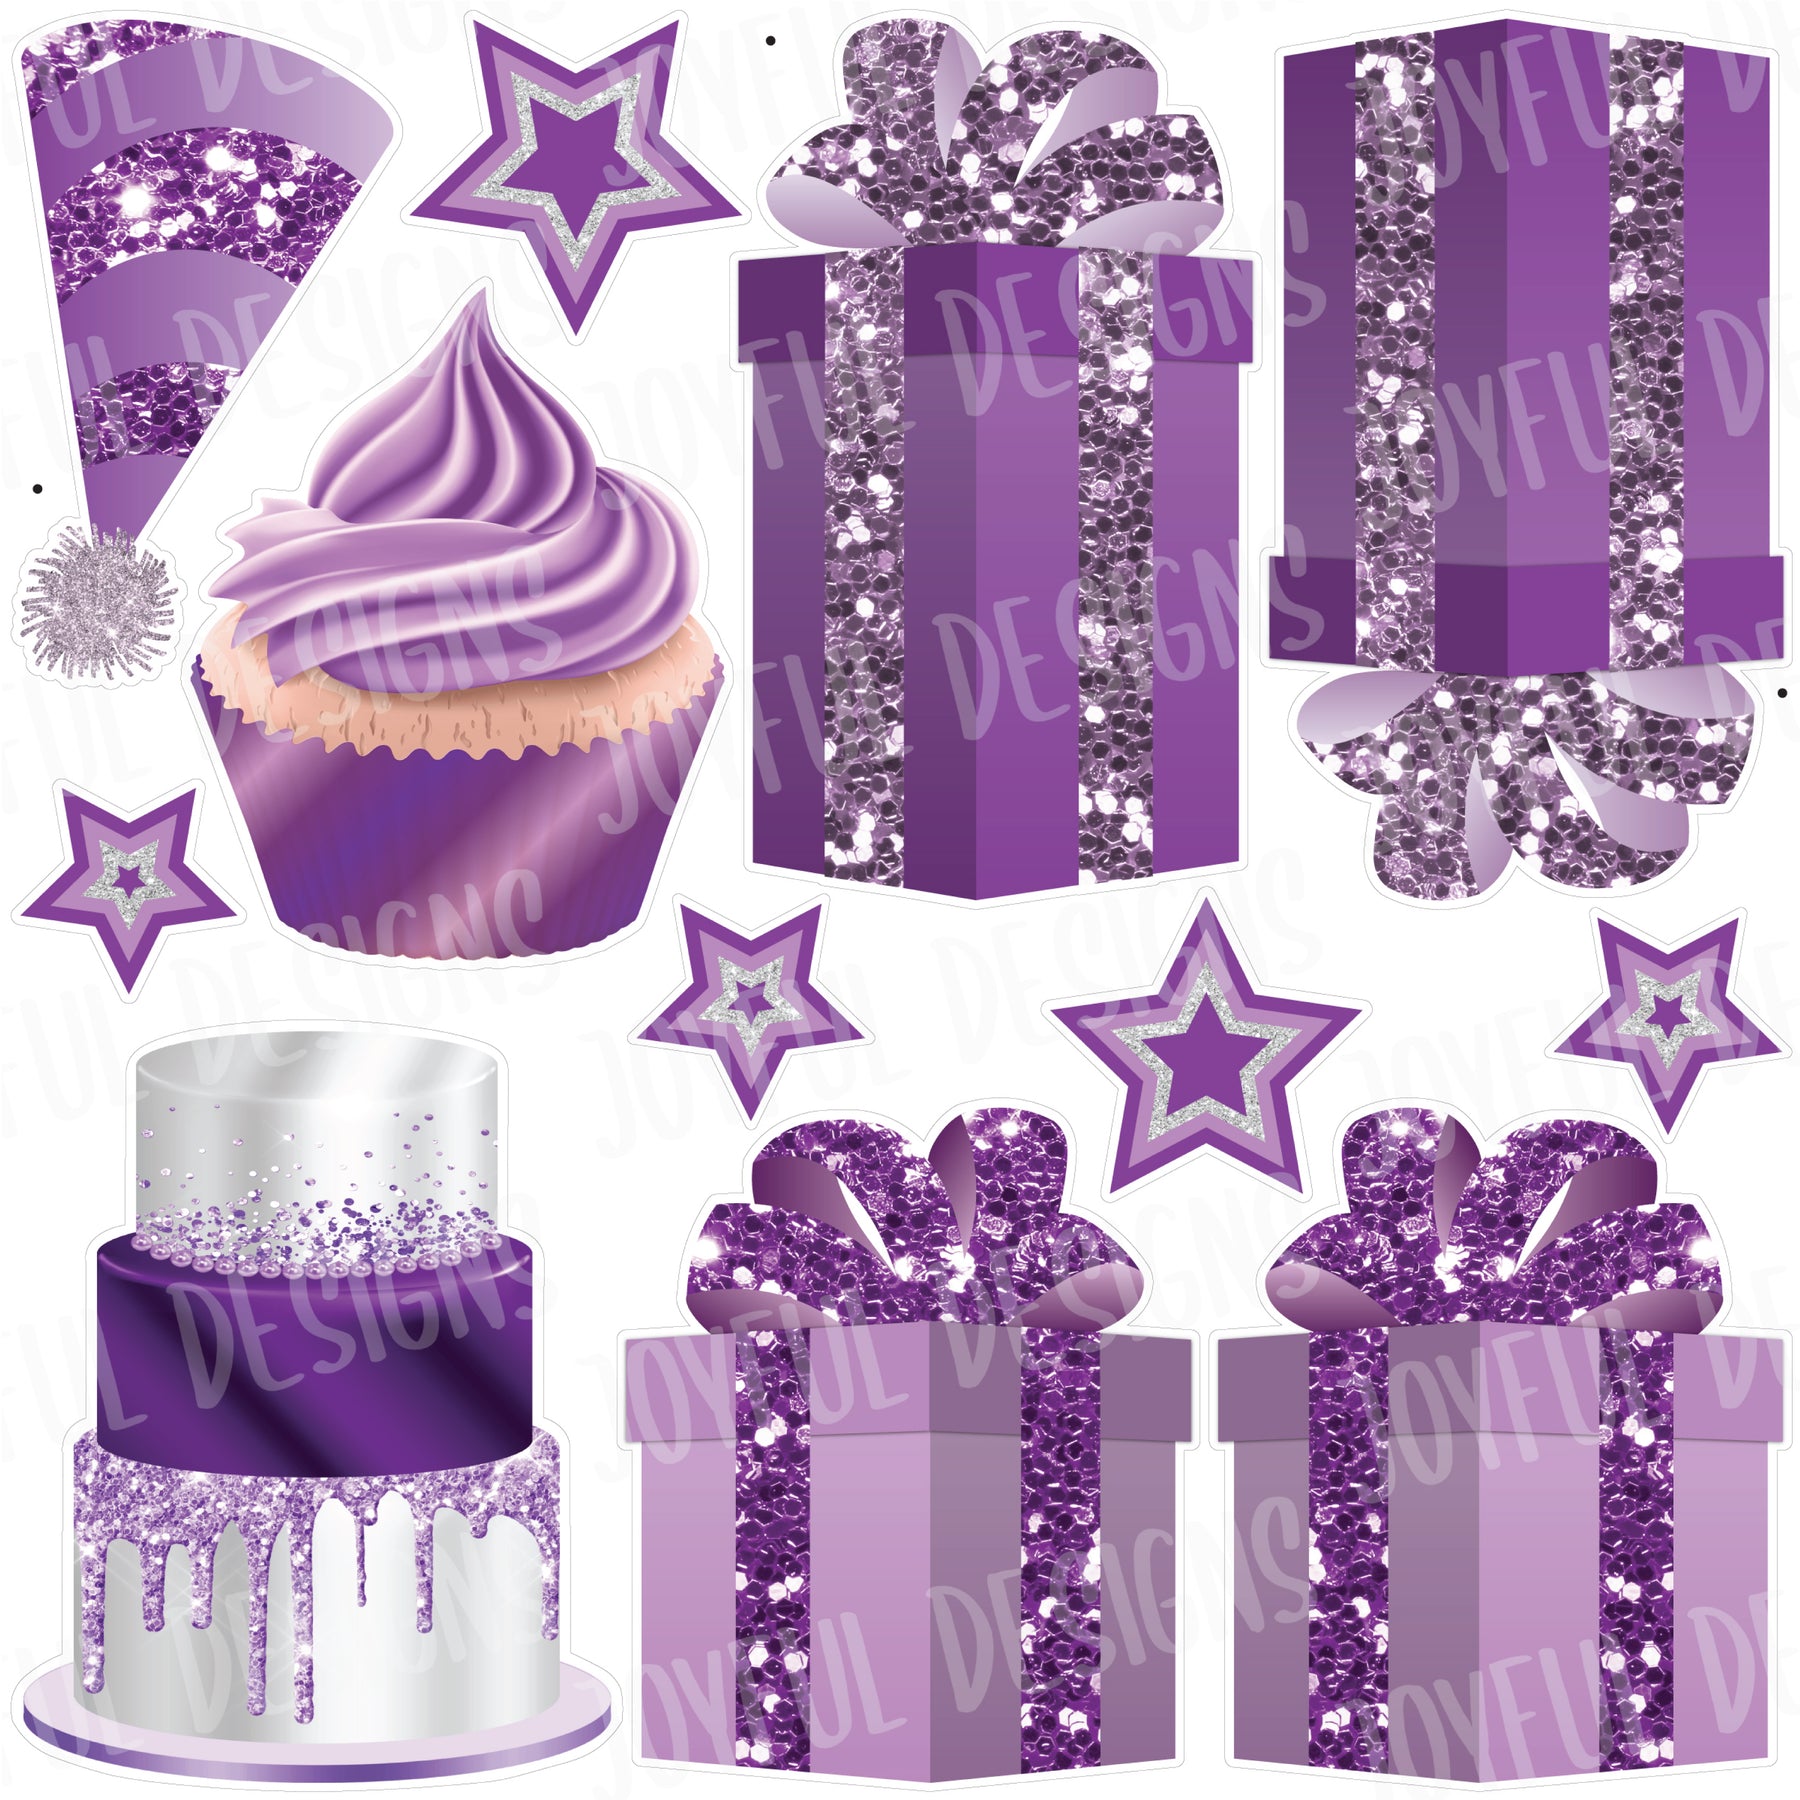 All The Purples Birthday Flair Half from "One and Done" Set